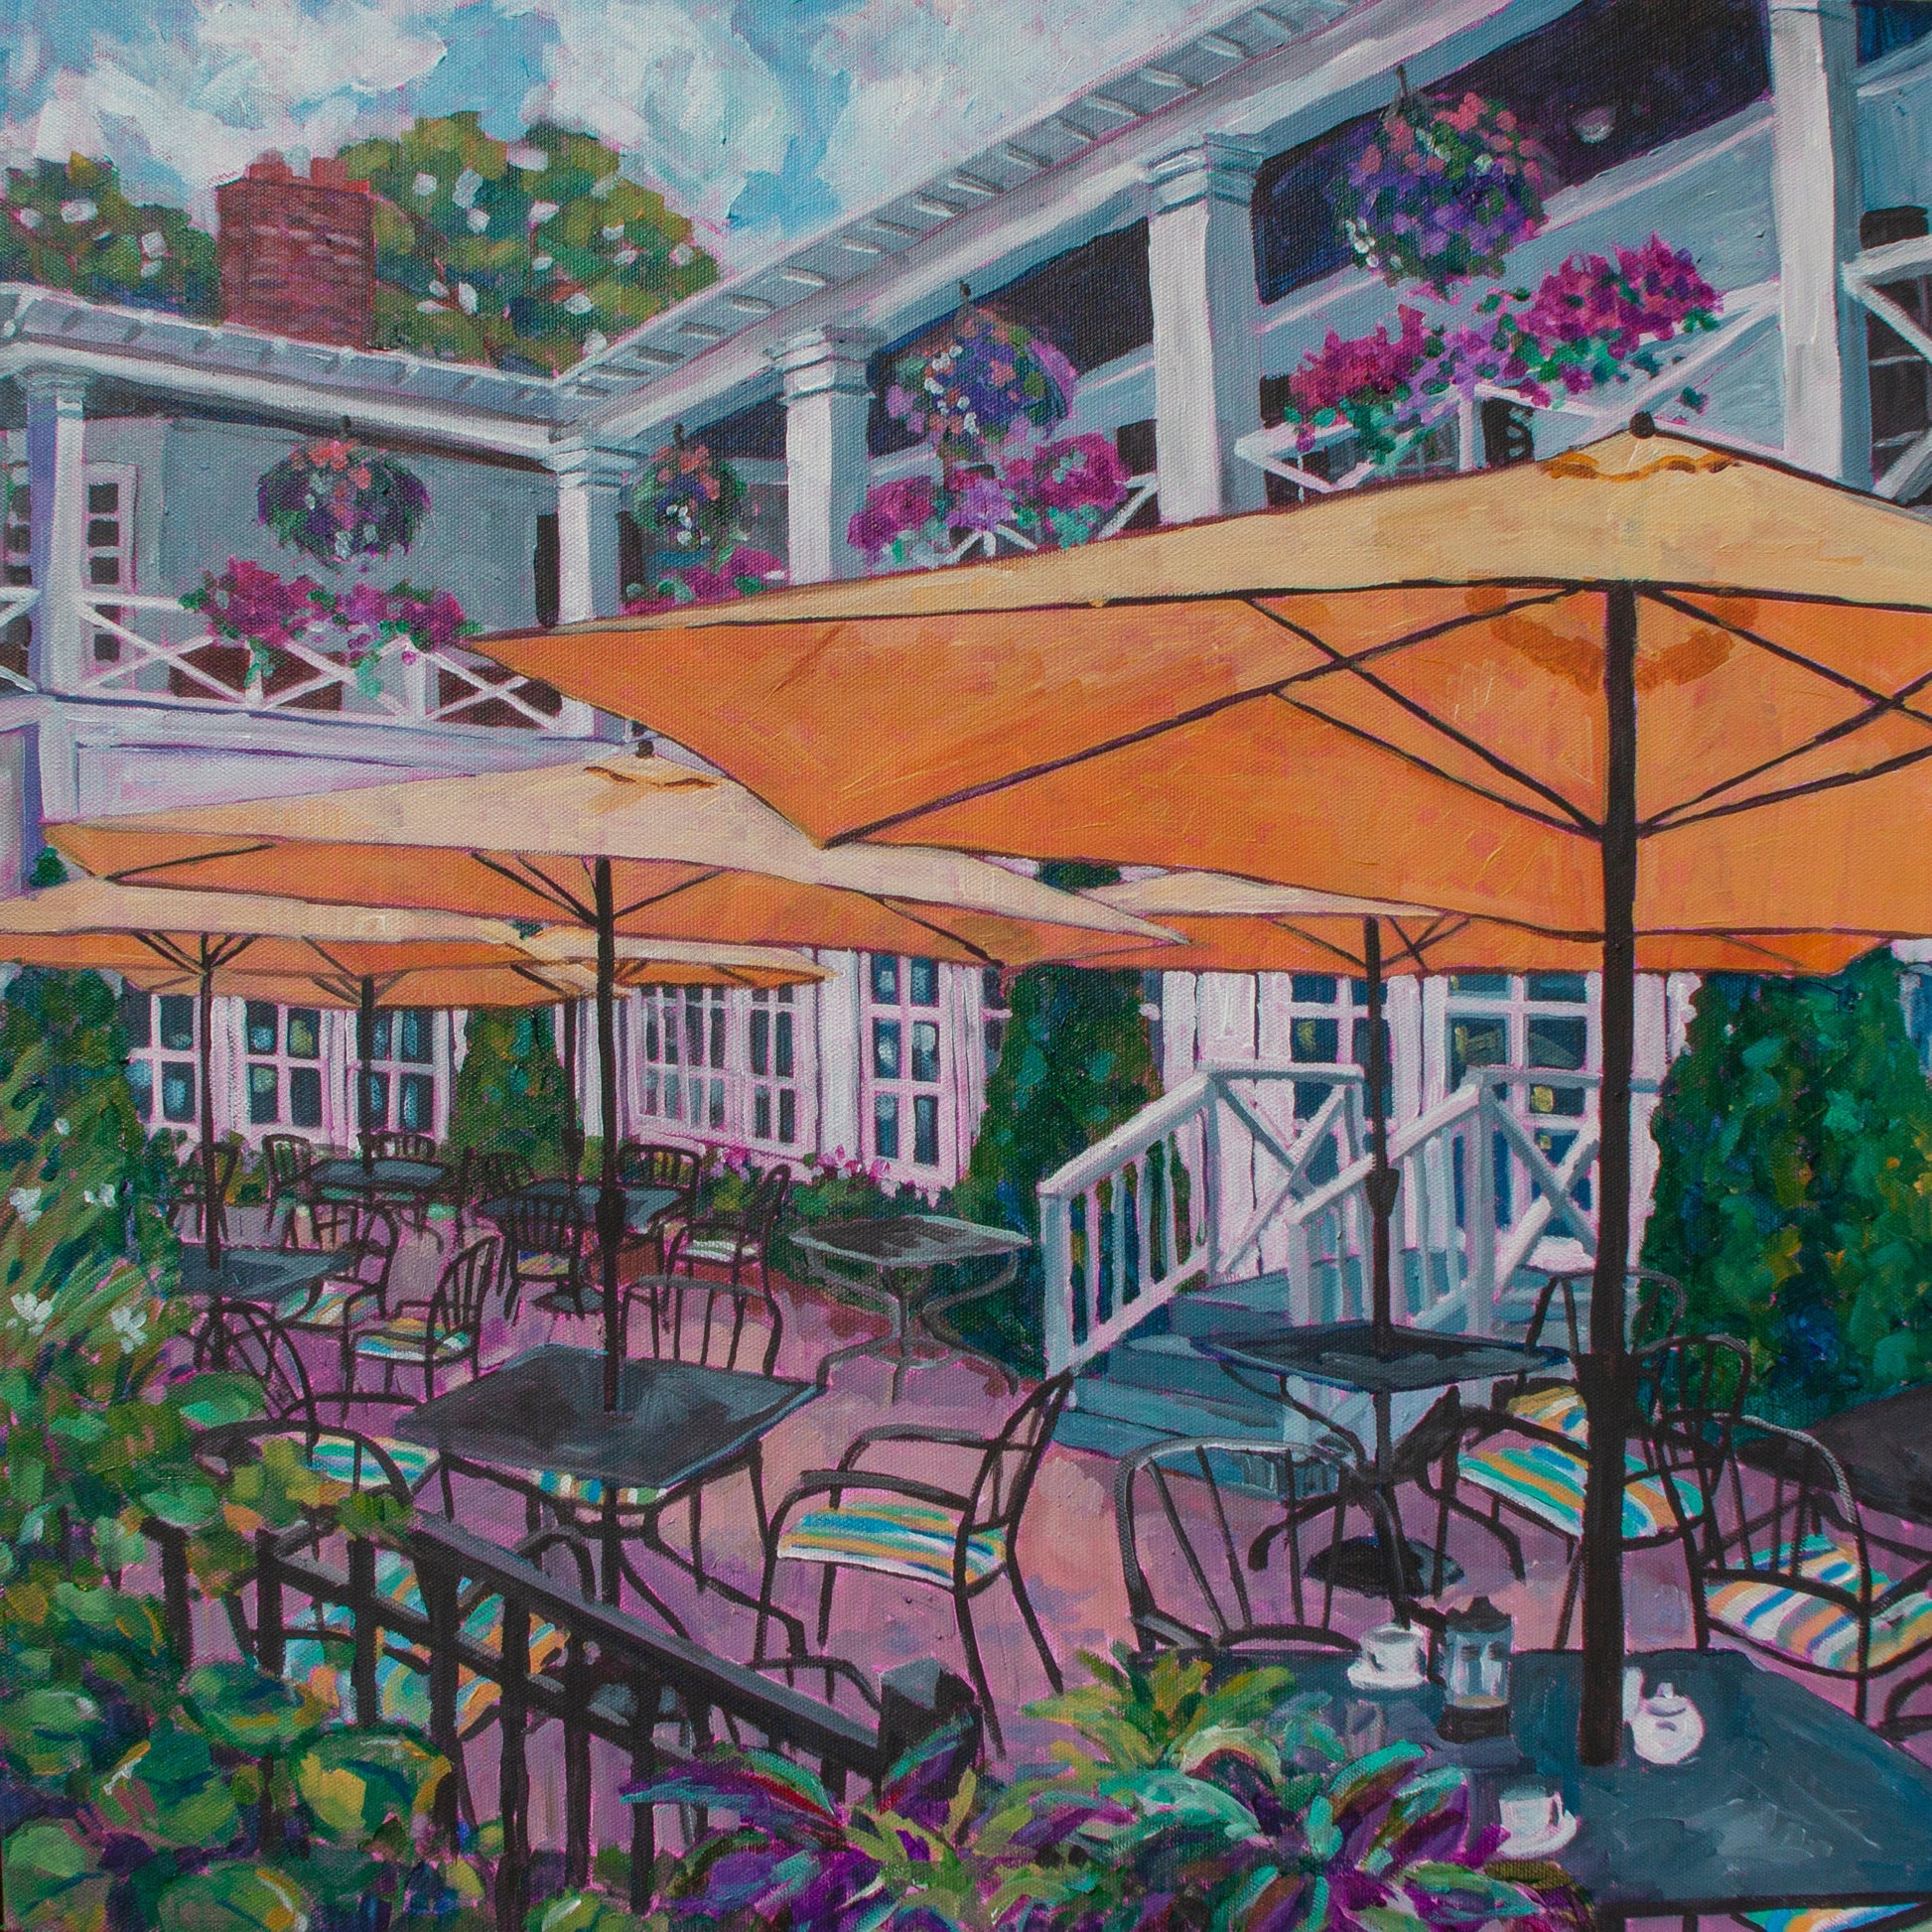 Original vibrant  impressionistic painting of a Cafe with yellow umbrellas in Niagara on the Lake in Ontario Canada